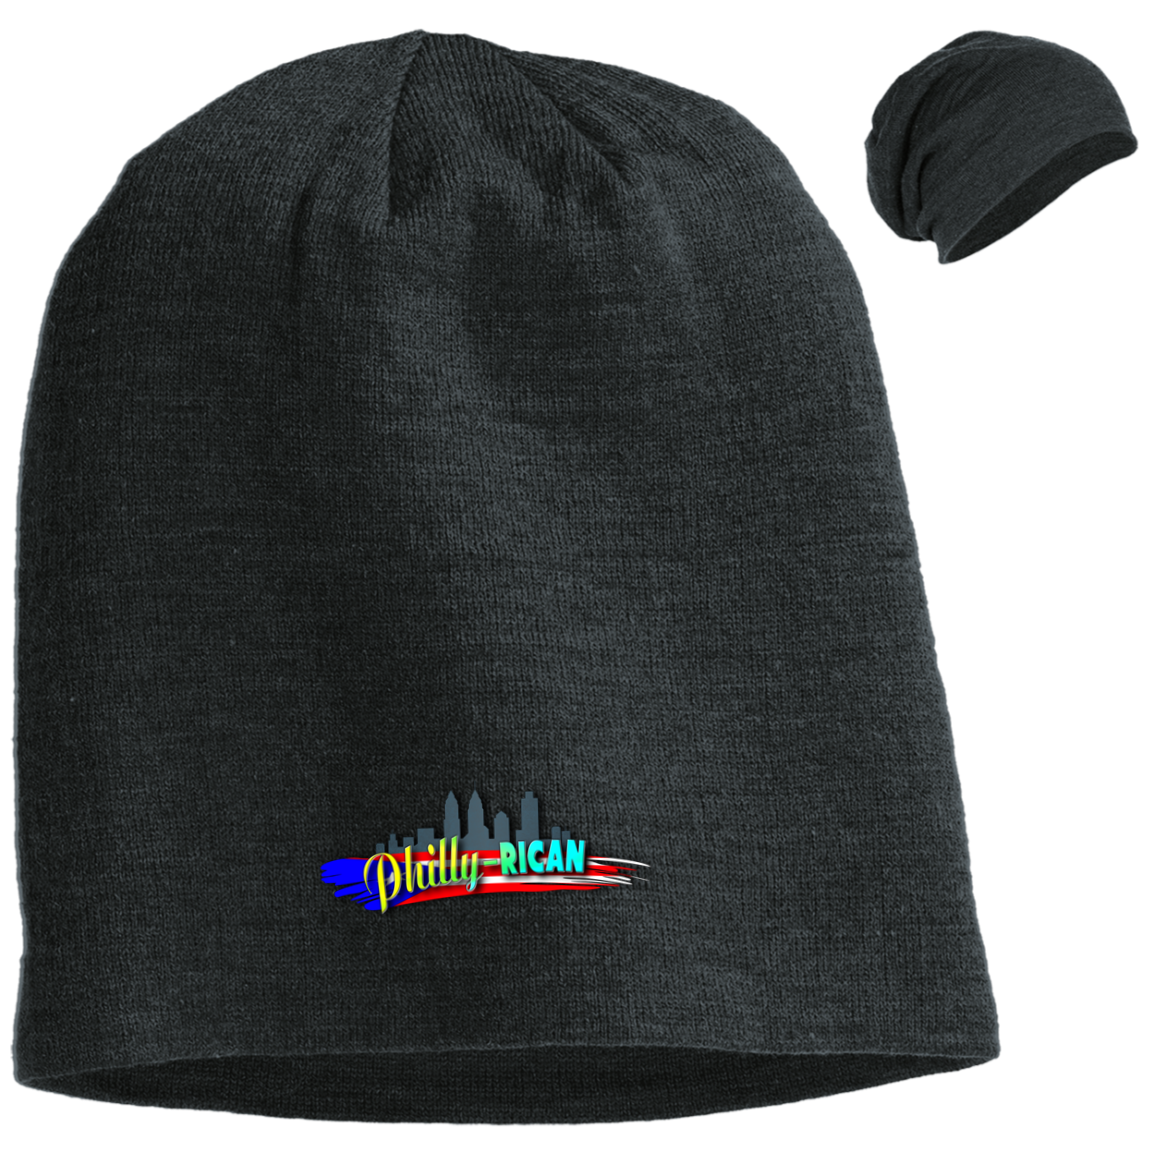 Philly-Rican Slouch Beanie - Puerto Rican Pride